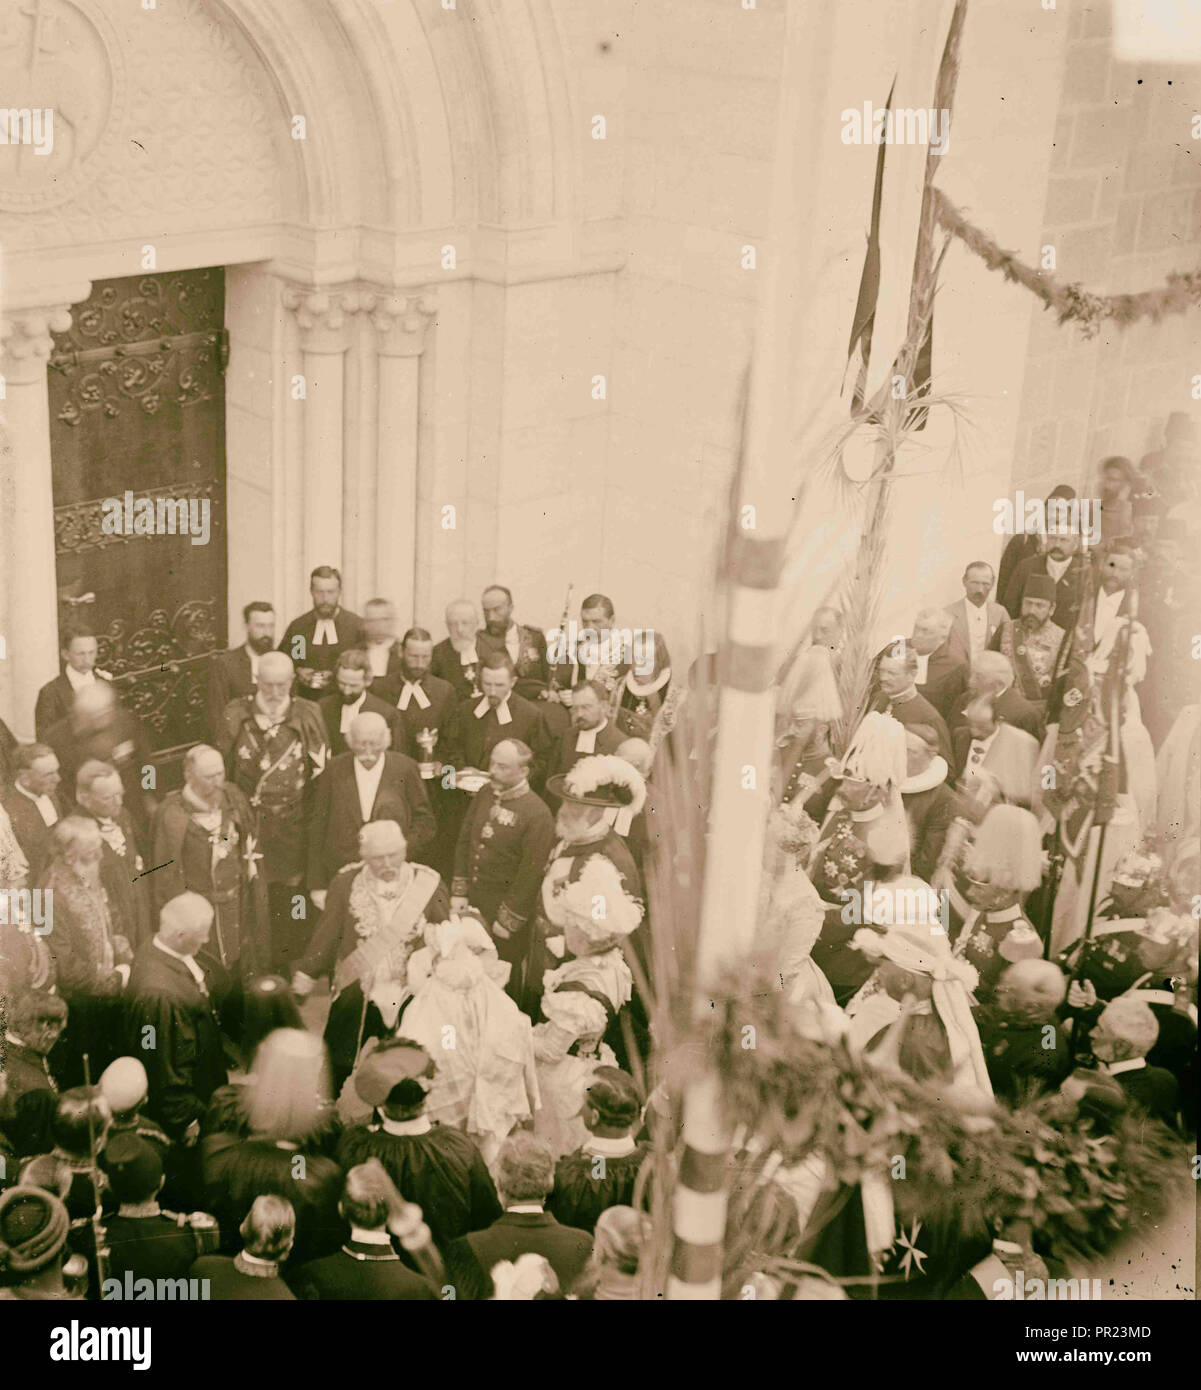 State visit to Jerusalem of Wilhelm II of Germany in 1898 Dedication ceremony at Church of the Redeemer. 1898, Jerusalem, Israel Stock Photo